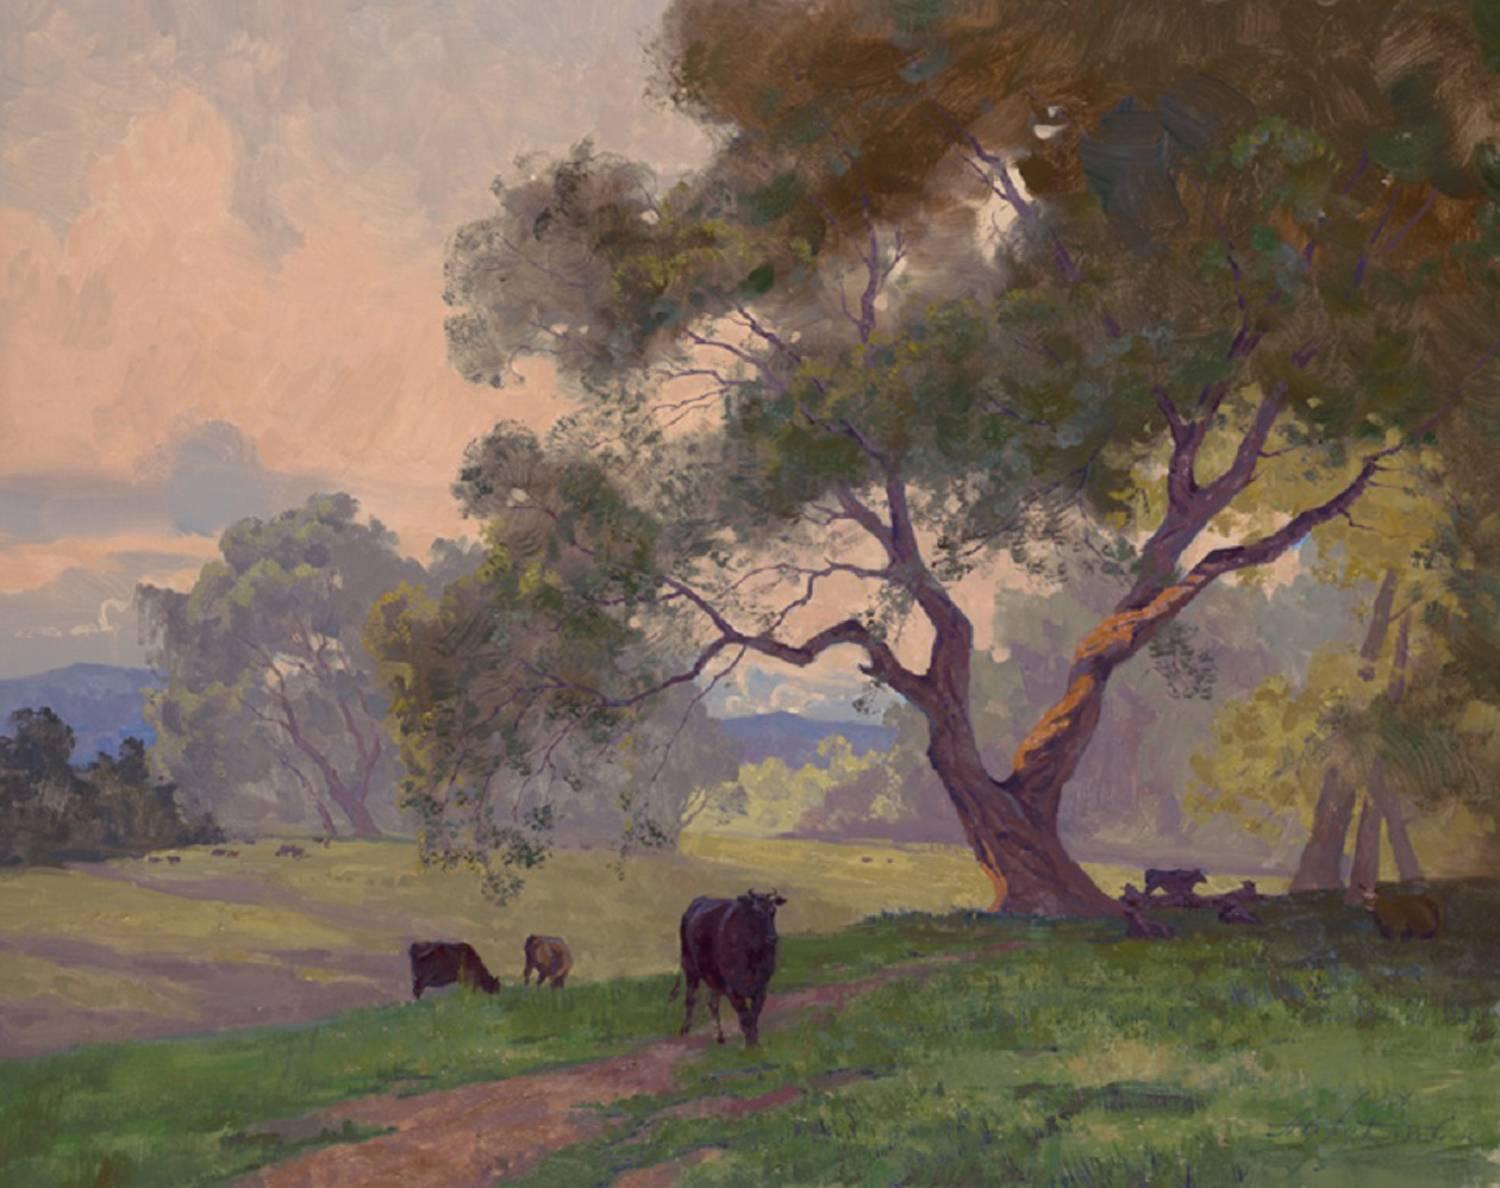 In Shadow of the Oak - Painting by Alexey Steele